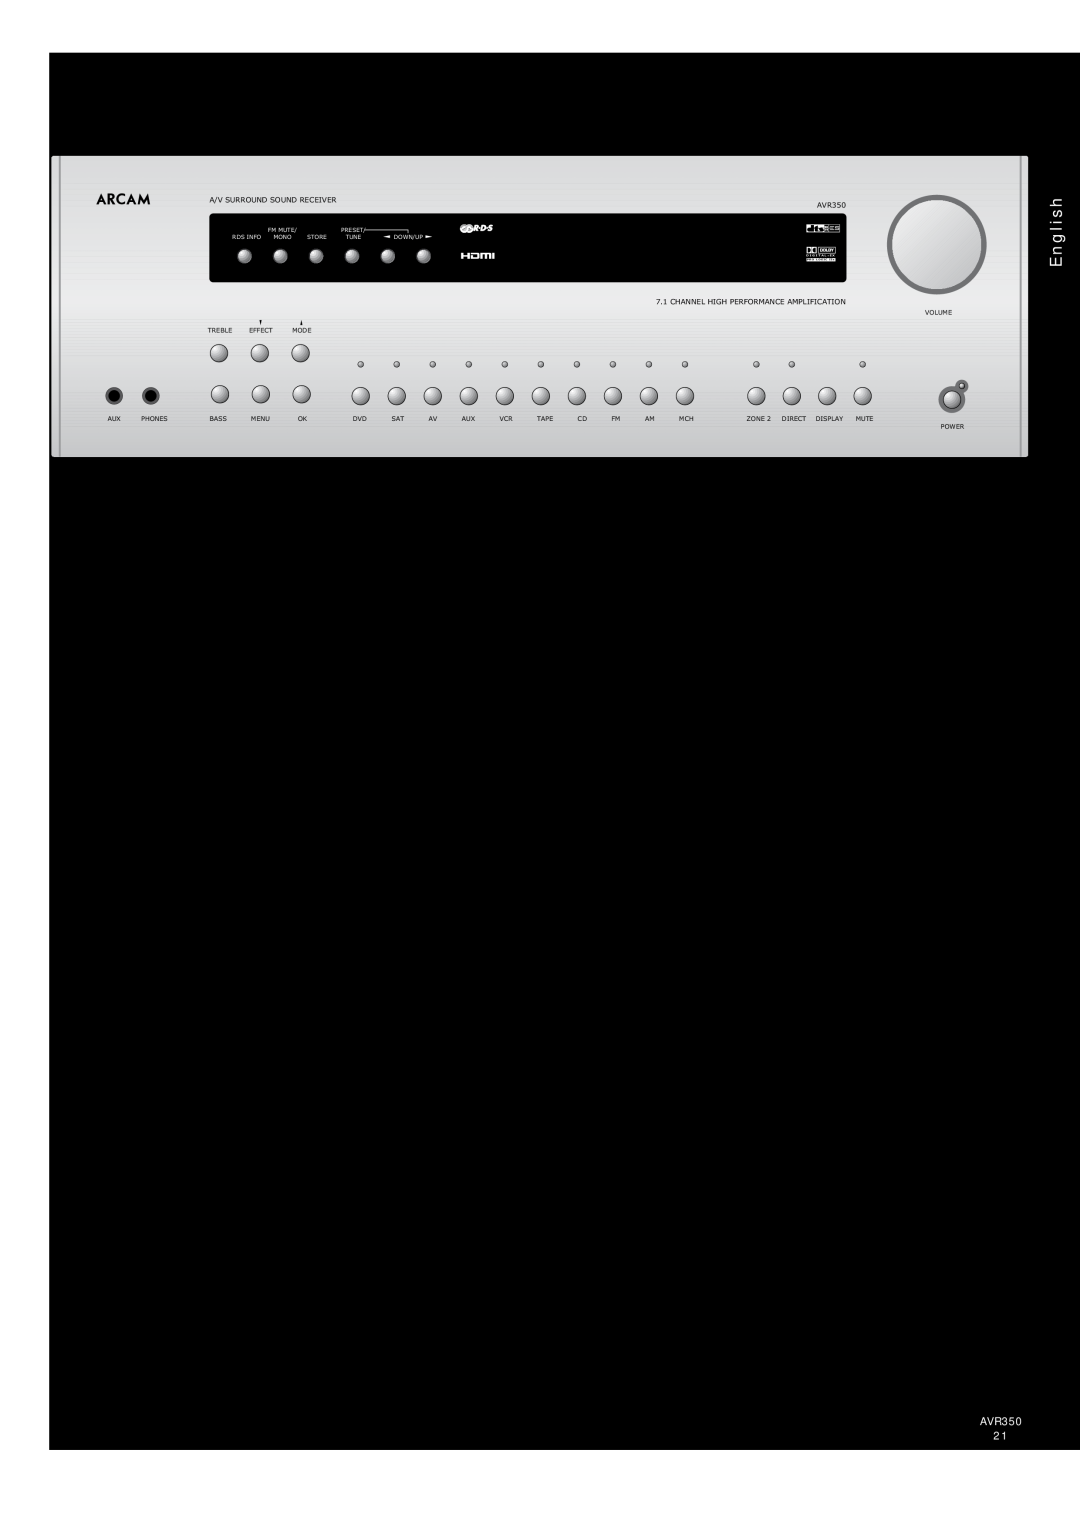 Arcam manual Operating your AVR350, Switching on/off, Volume control, Front panel display, Stand-by, Muting the volume 